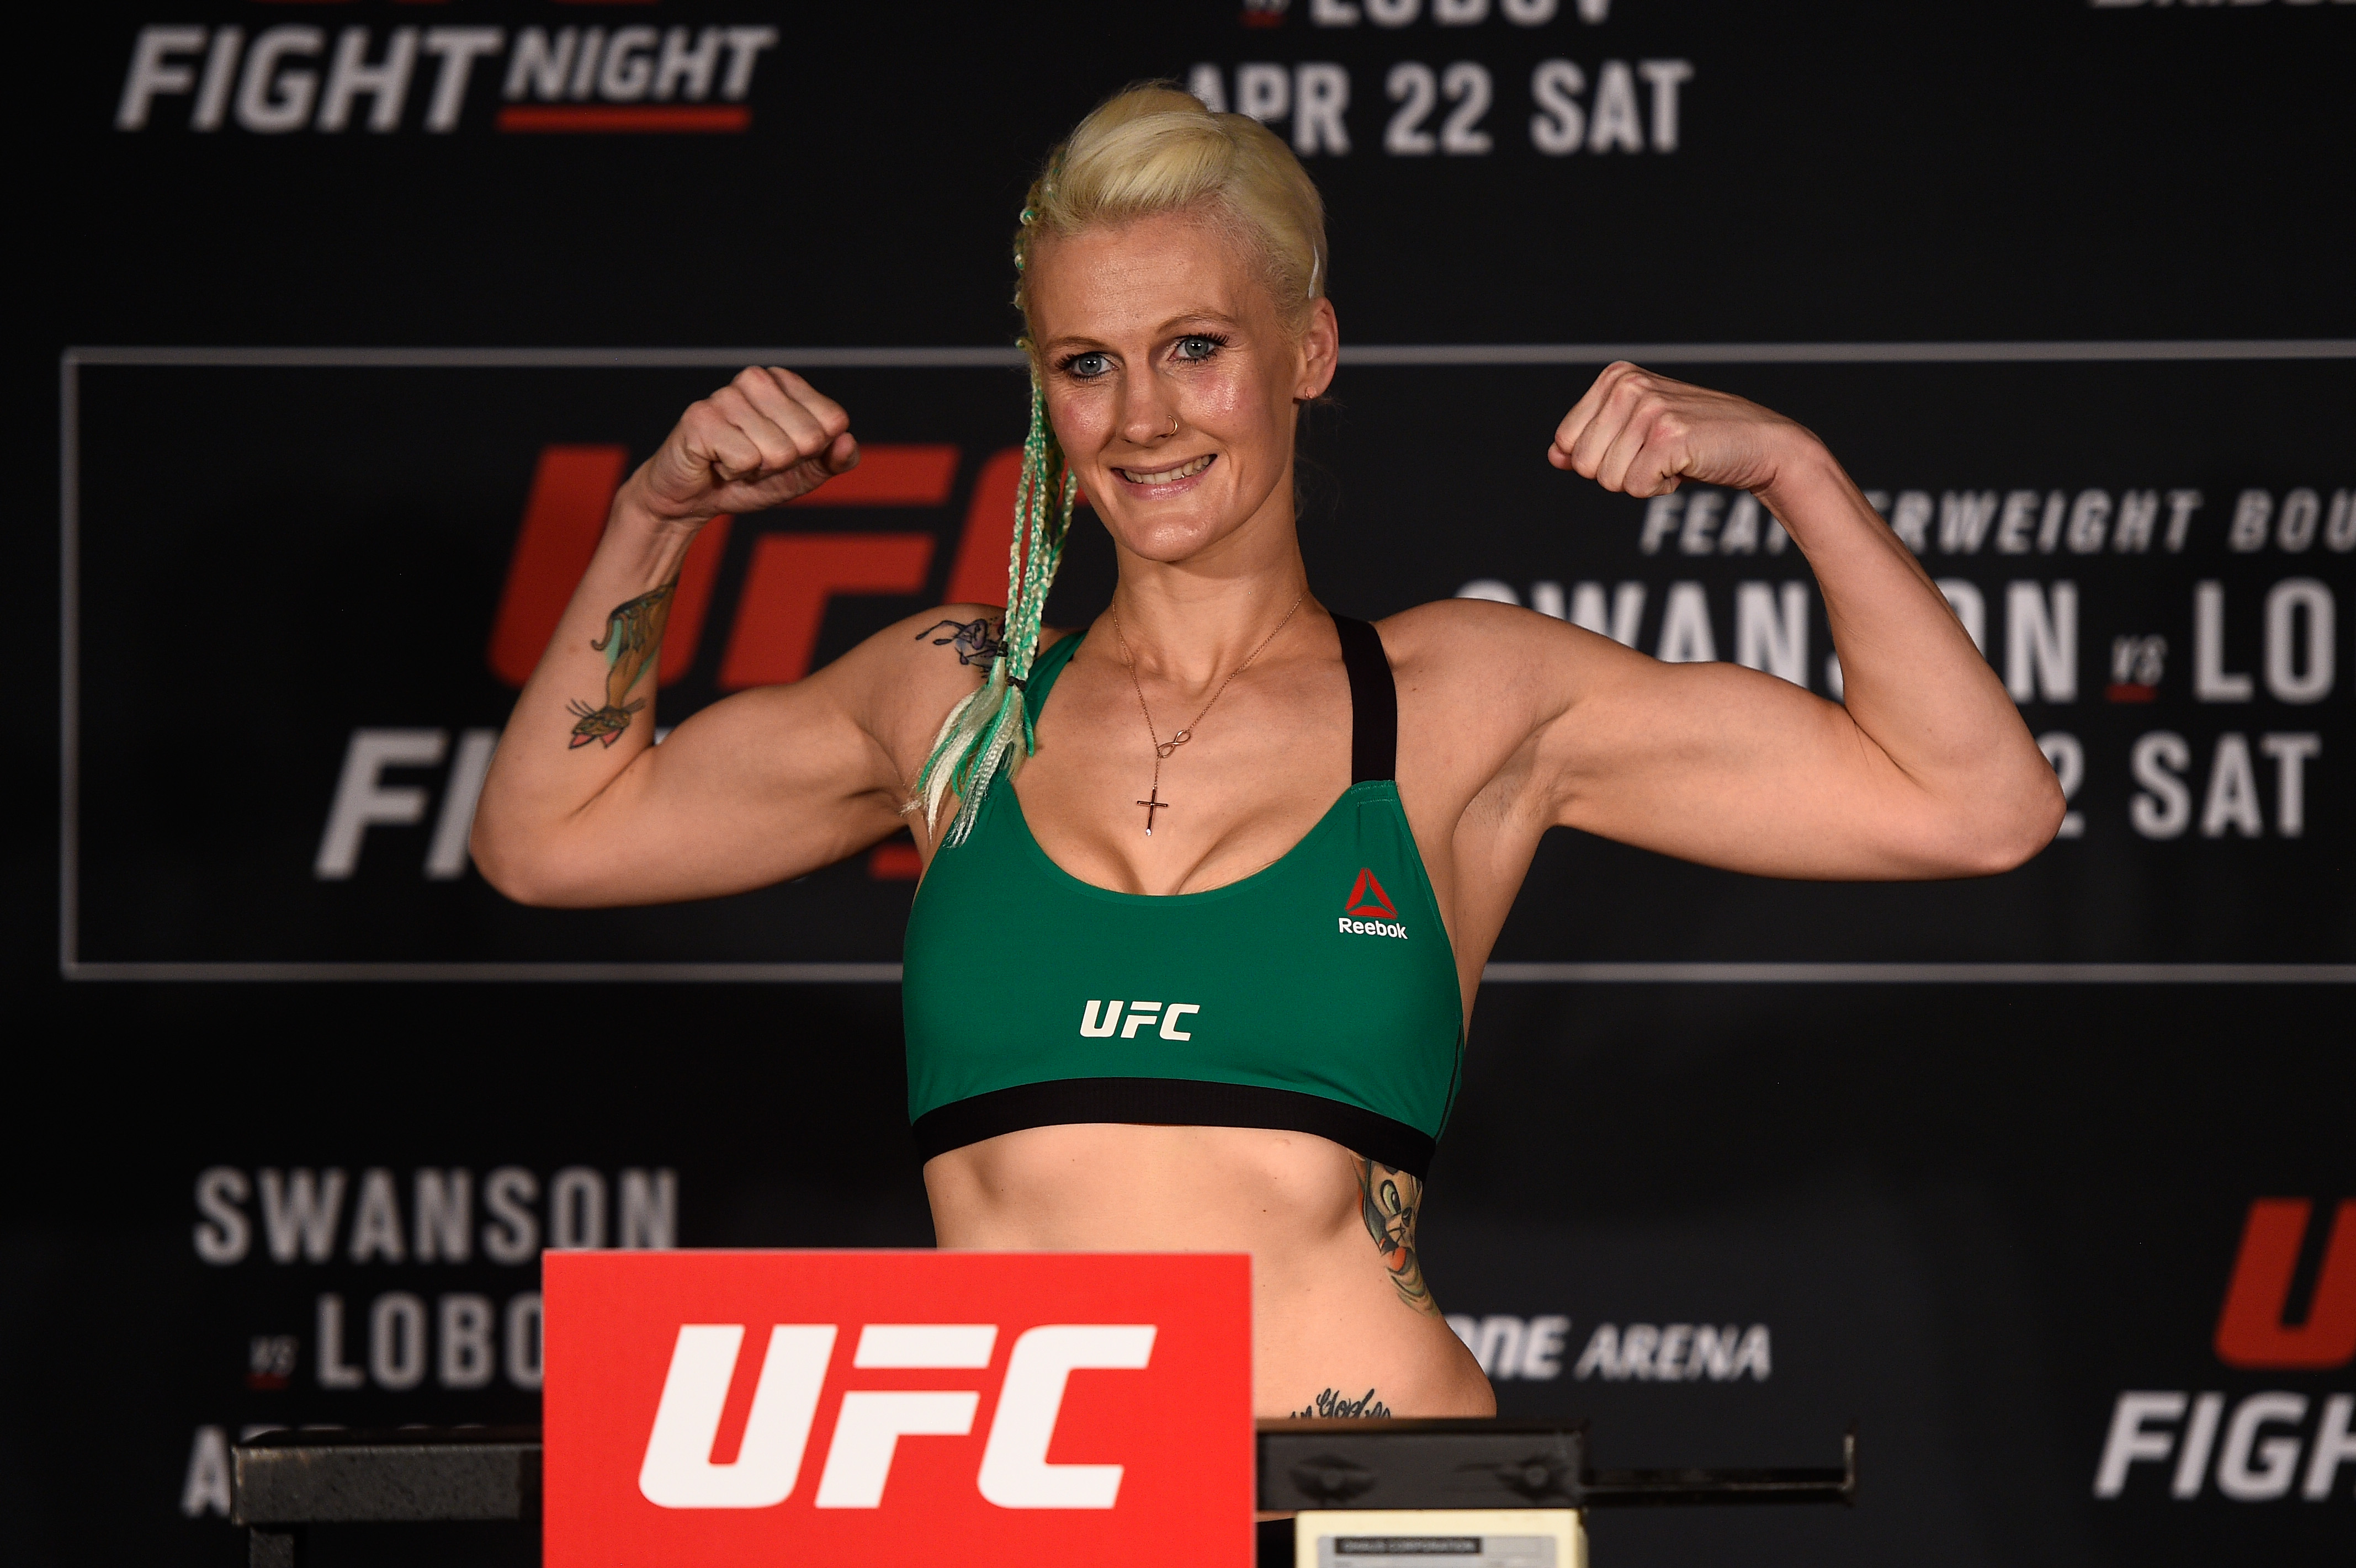 Female Fighter Porn - Former UFC Fighter Cindy Dandois Has Turned to Adult Site to Make Money  During Pandemic